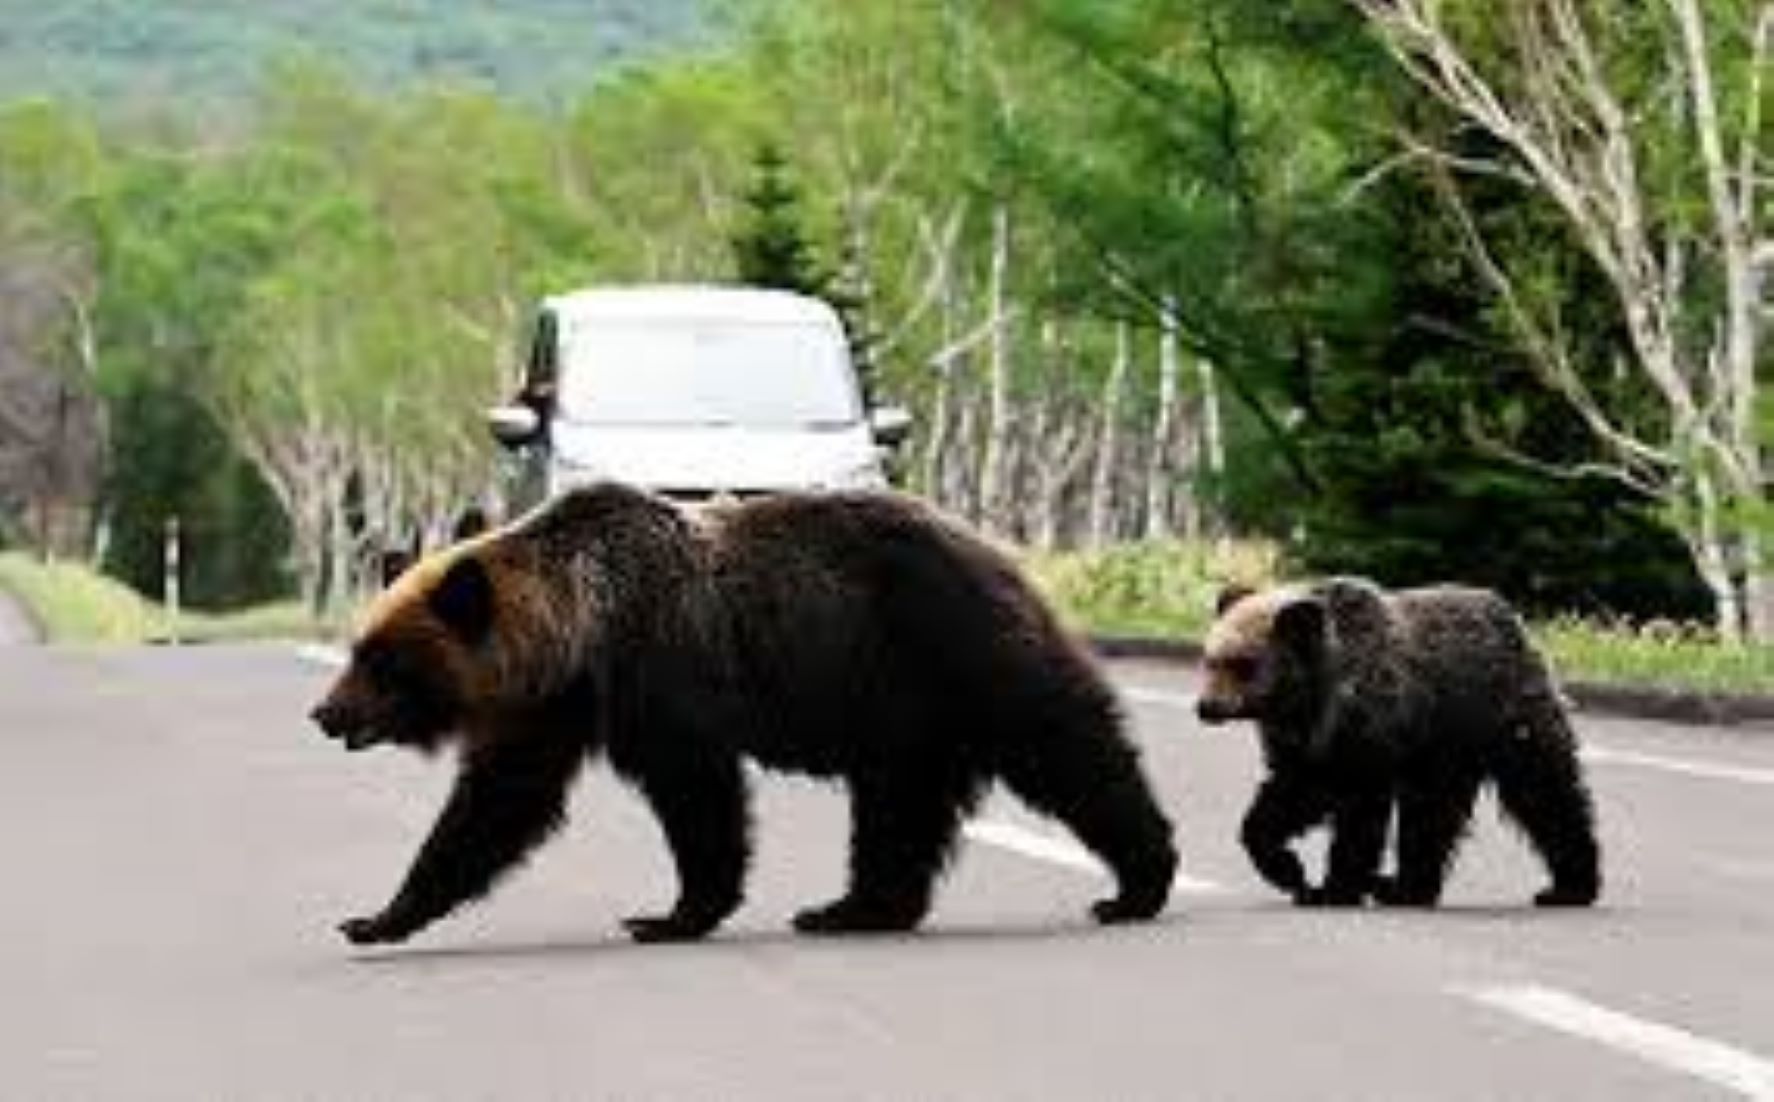 Bears Designated As Animal Subject To Subsidised Culling In Japan